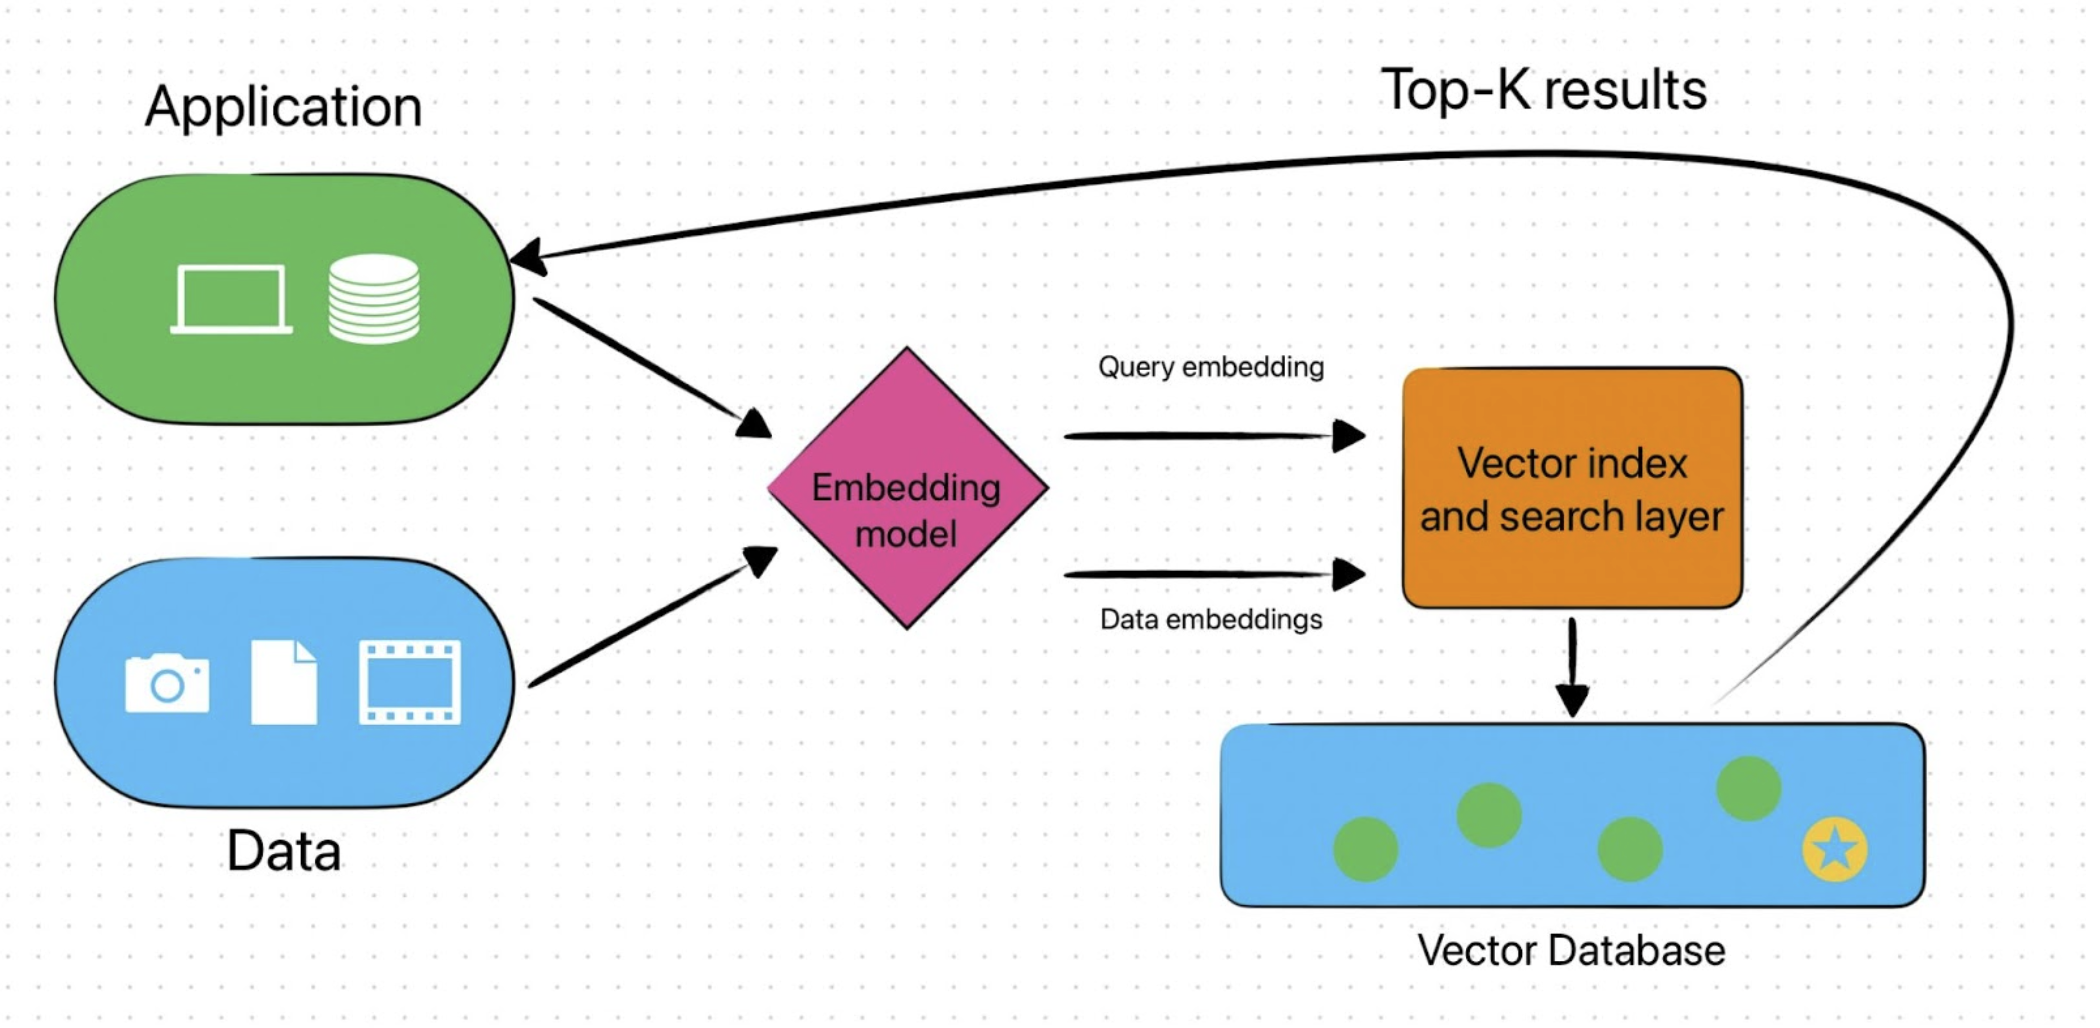 End-to-end diagram for a vector database